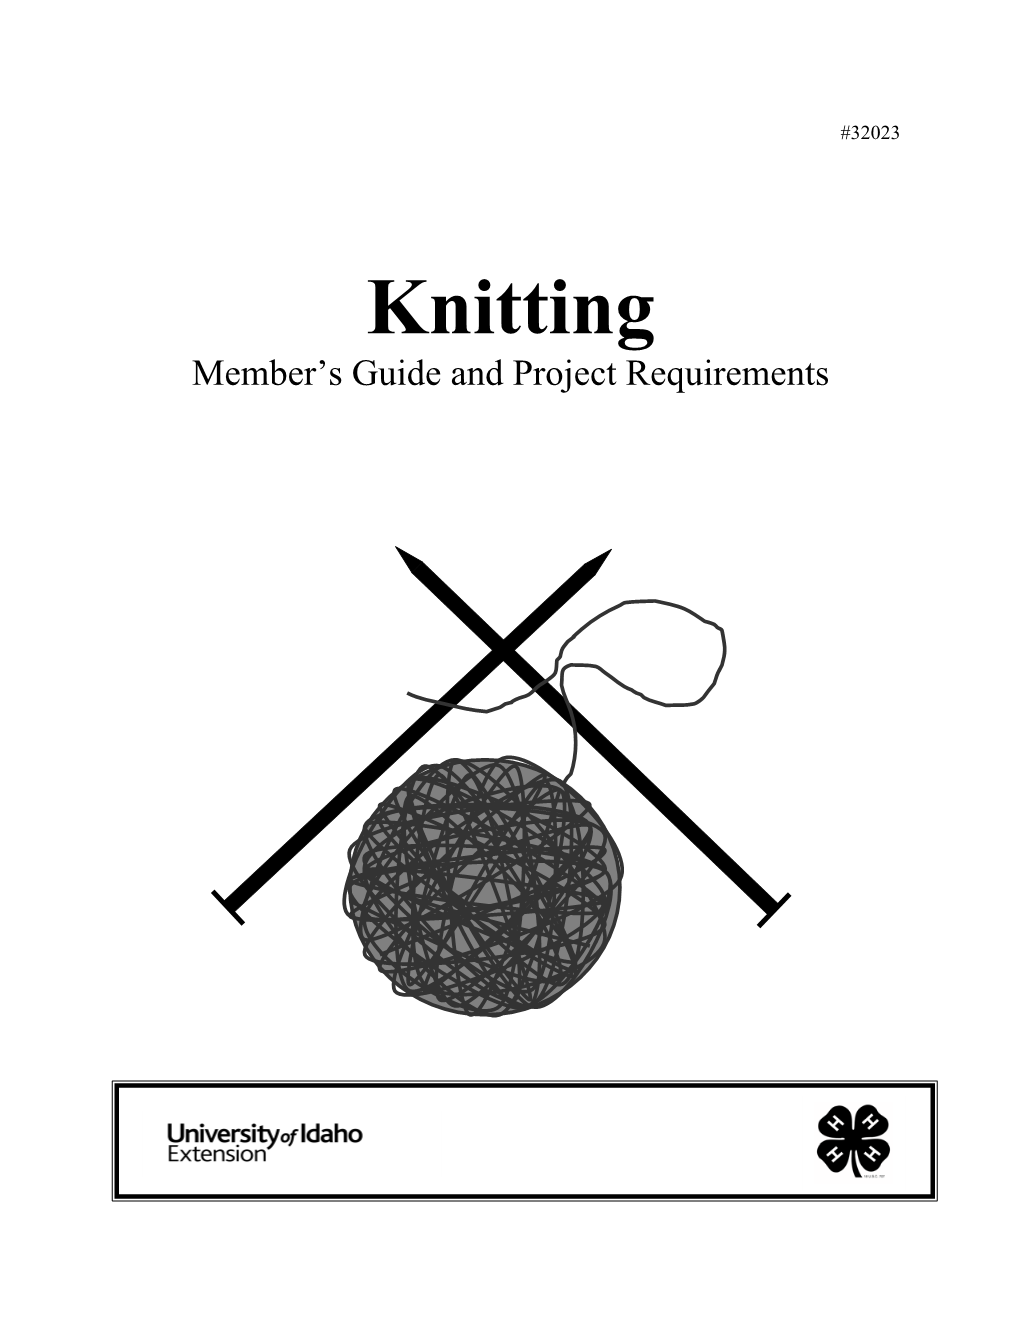 Knitting Project Member's Guide and Requirements